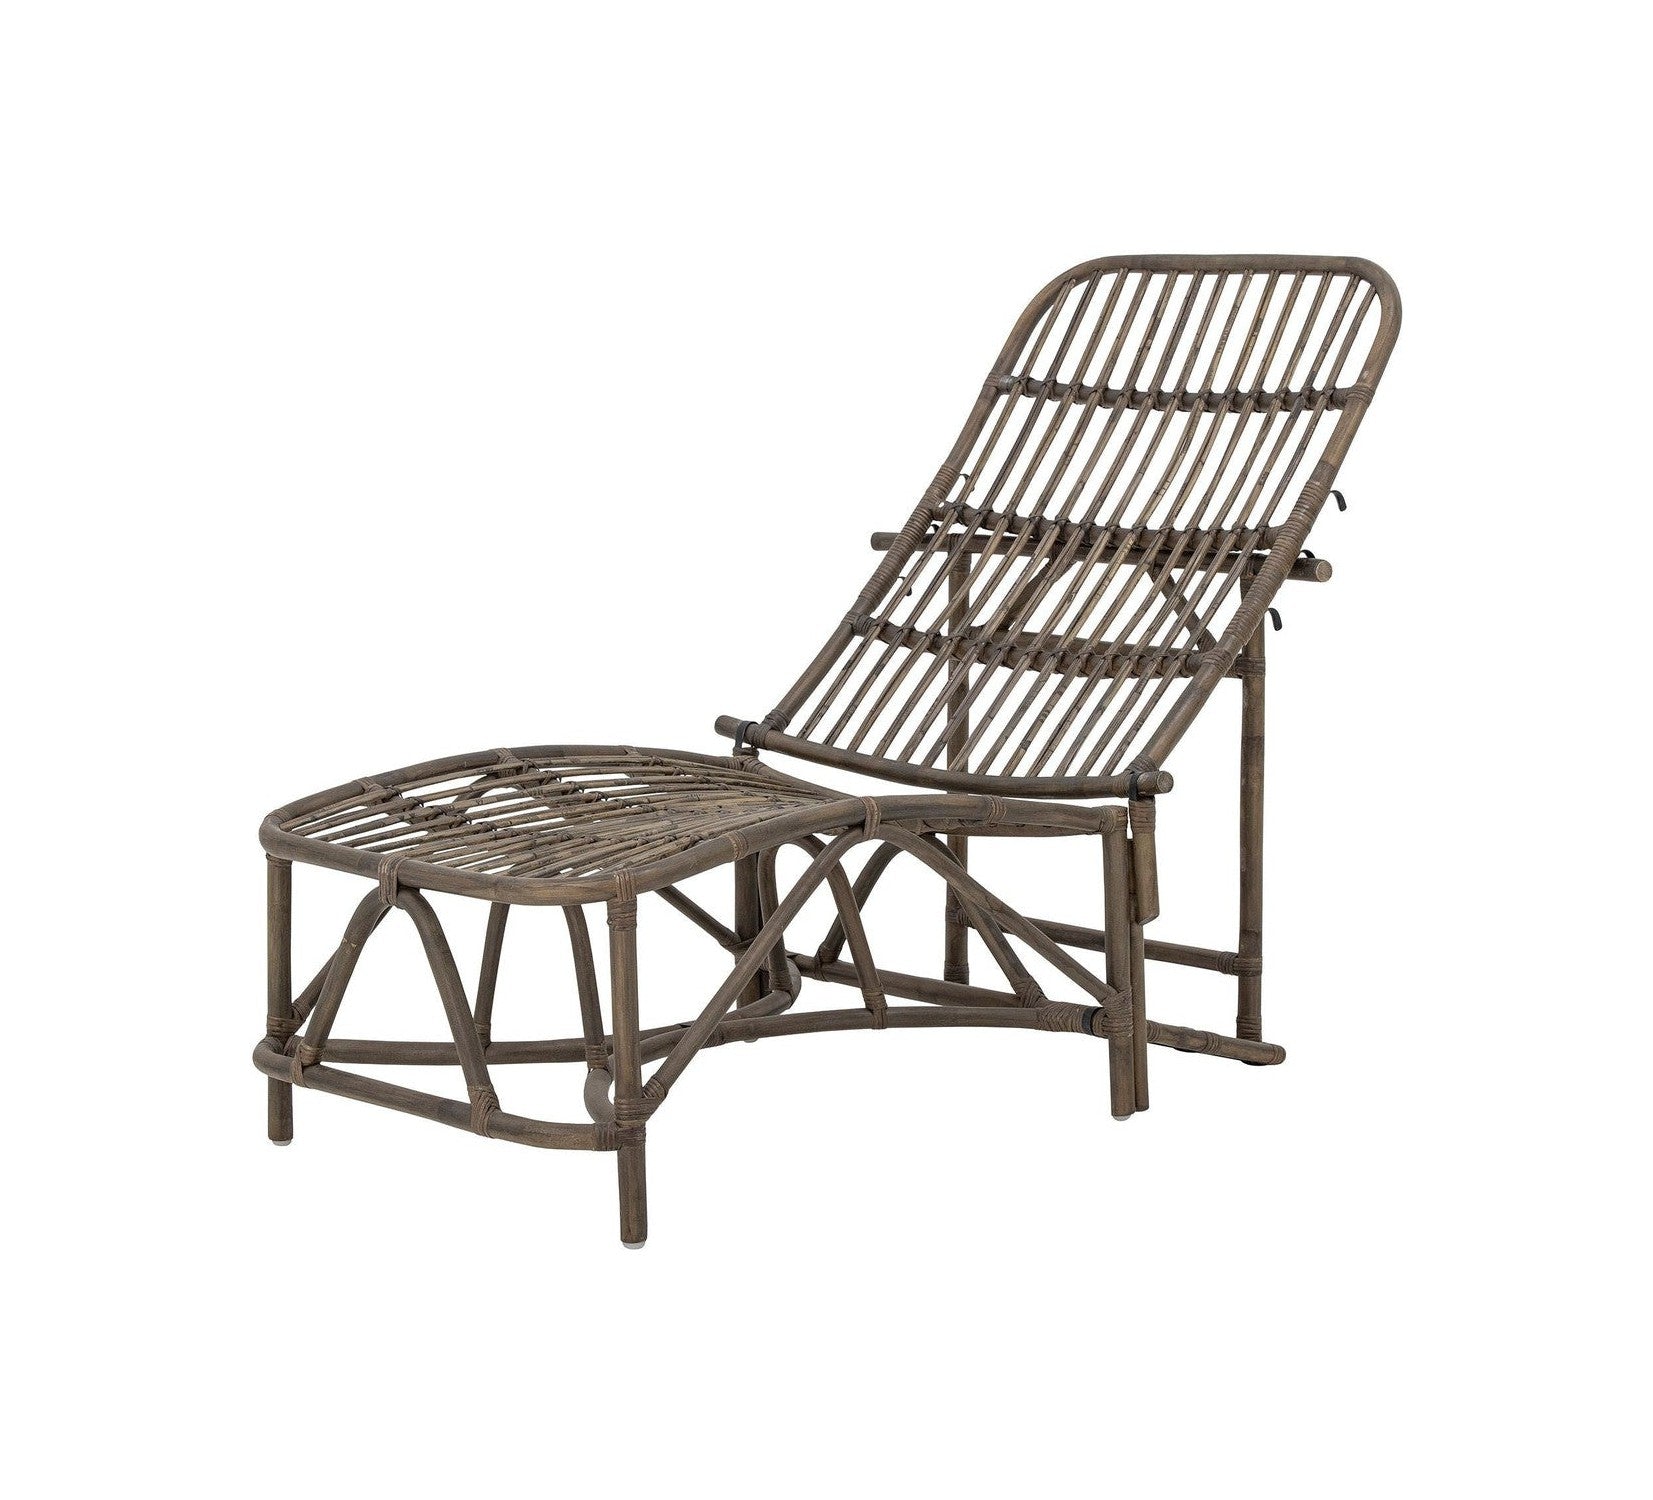 Bloomingville Dione Doll Chair, Brown, Rattan